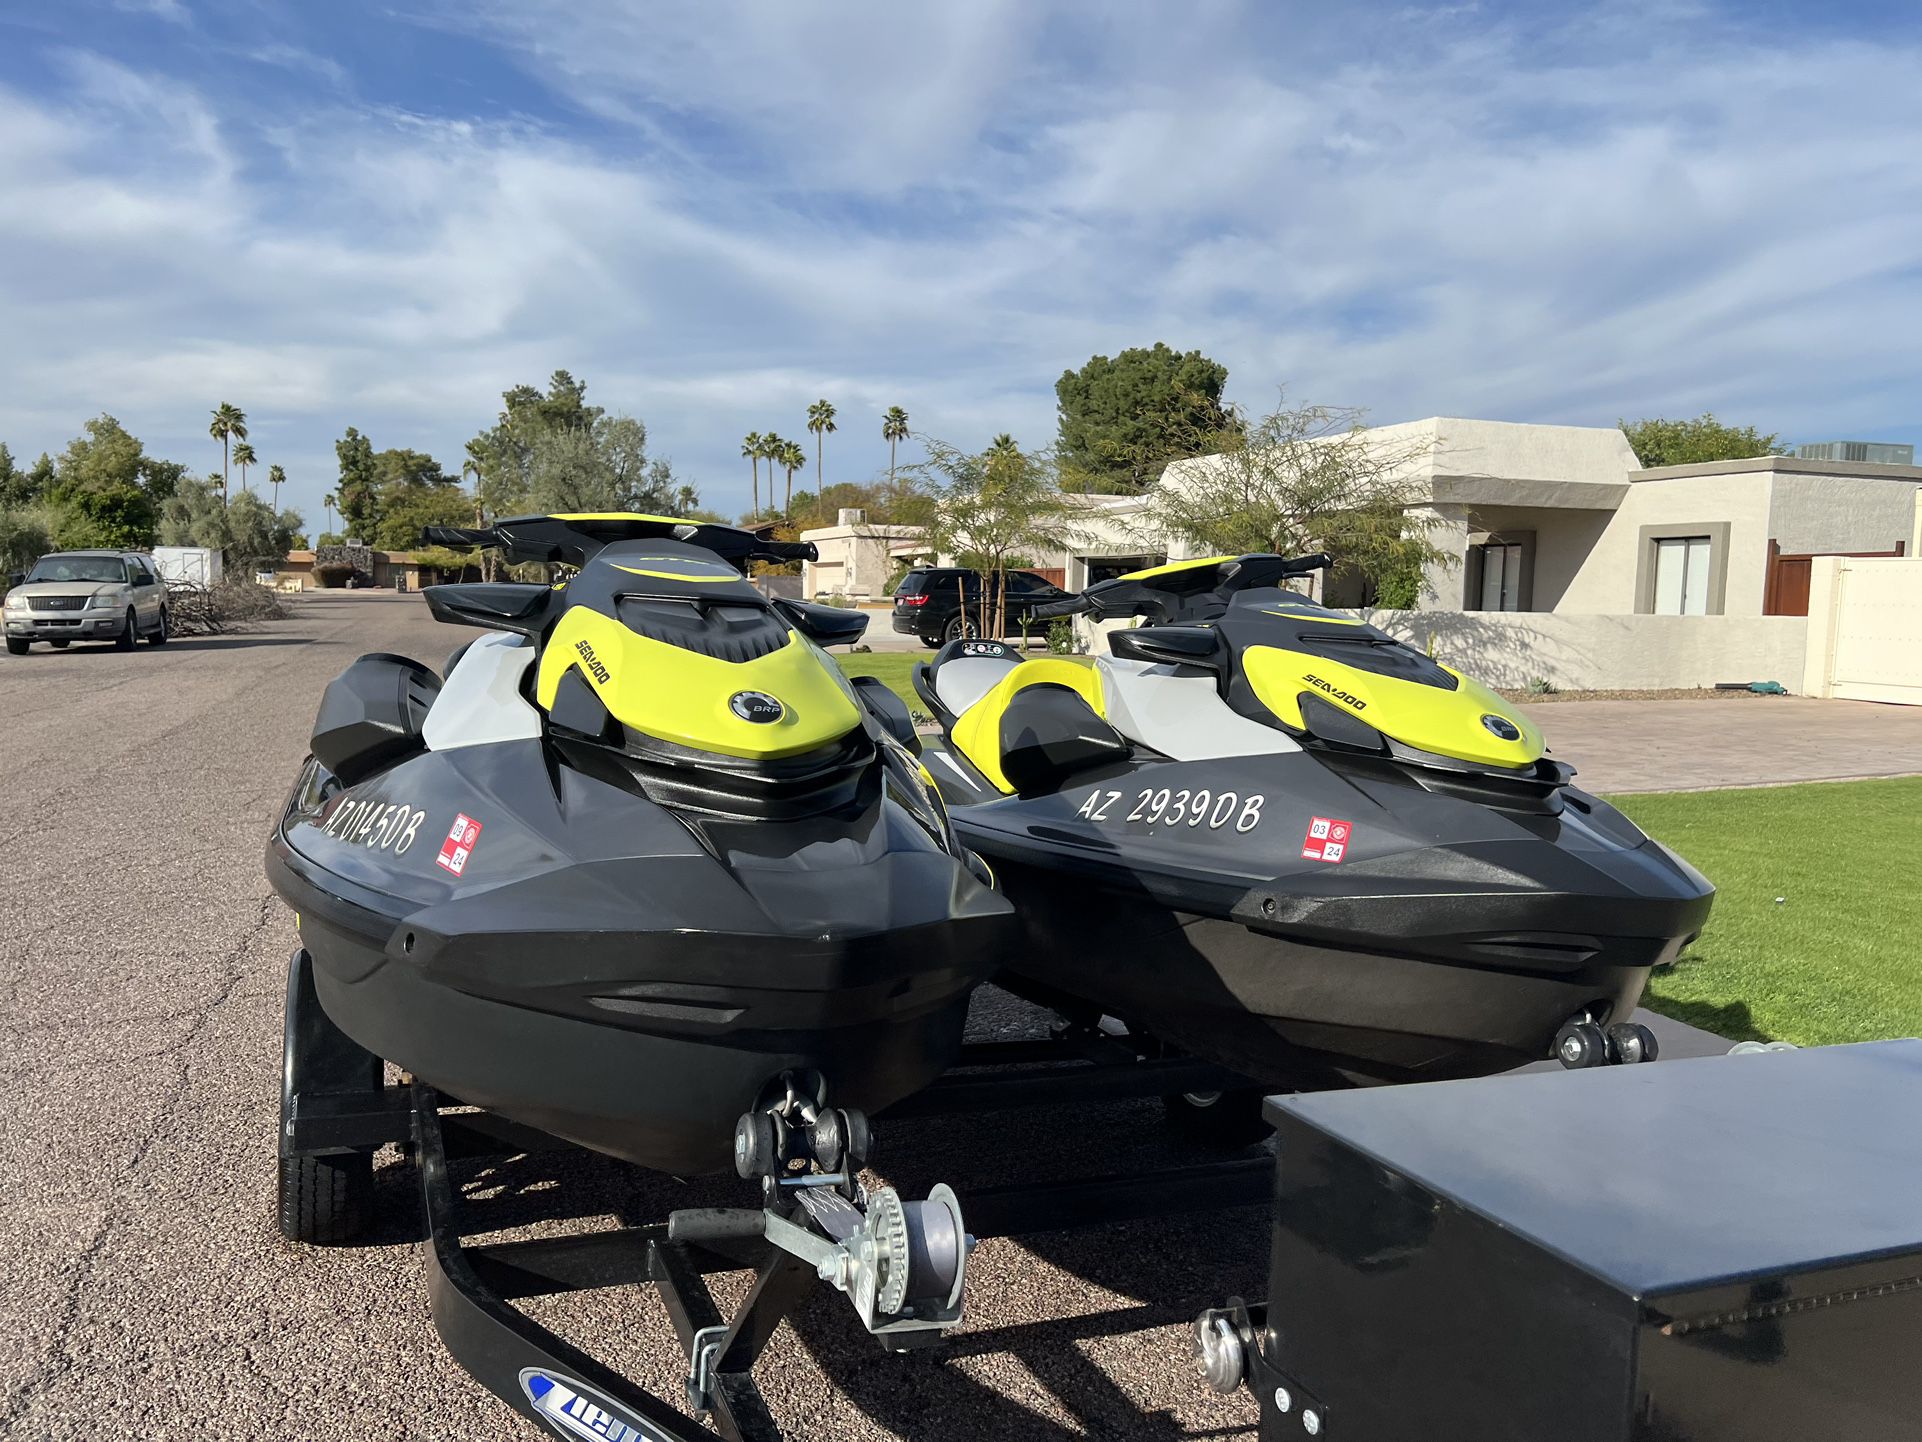 Seadoo Gtr 2021 Two Thirty. And 2020 Gtr Two Thirty . Great Jet Skies Ready For The Water 